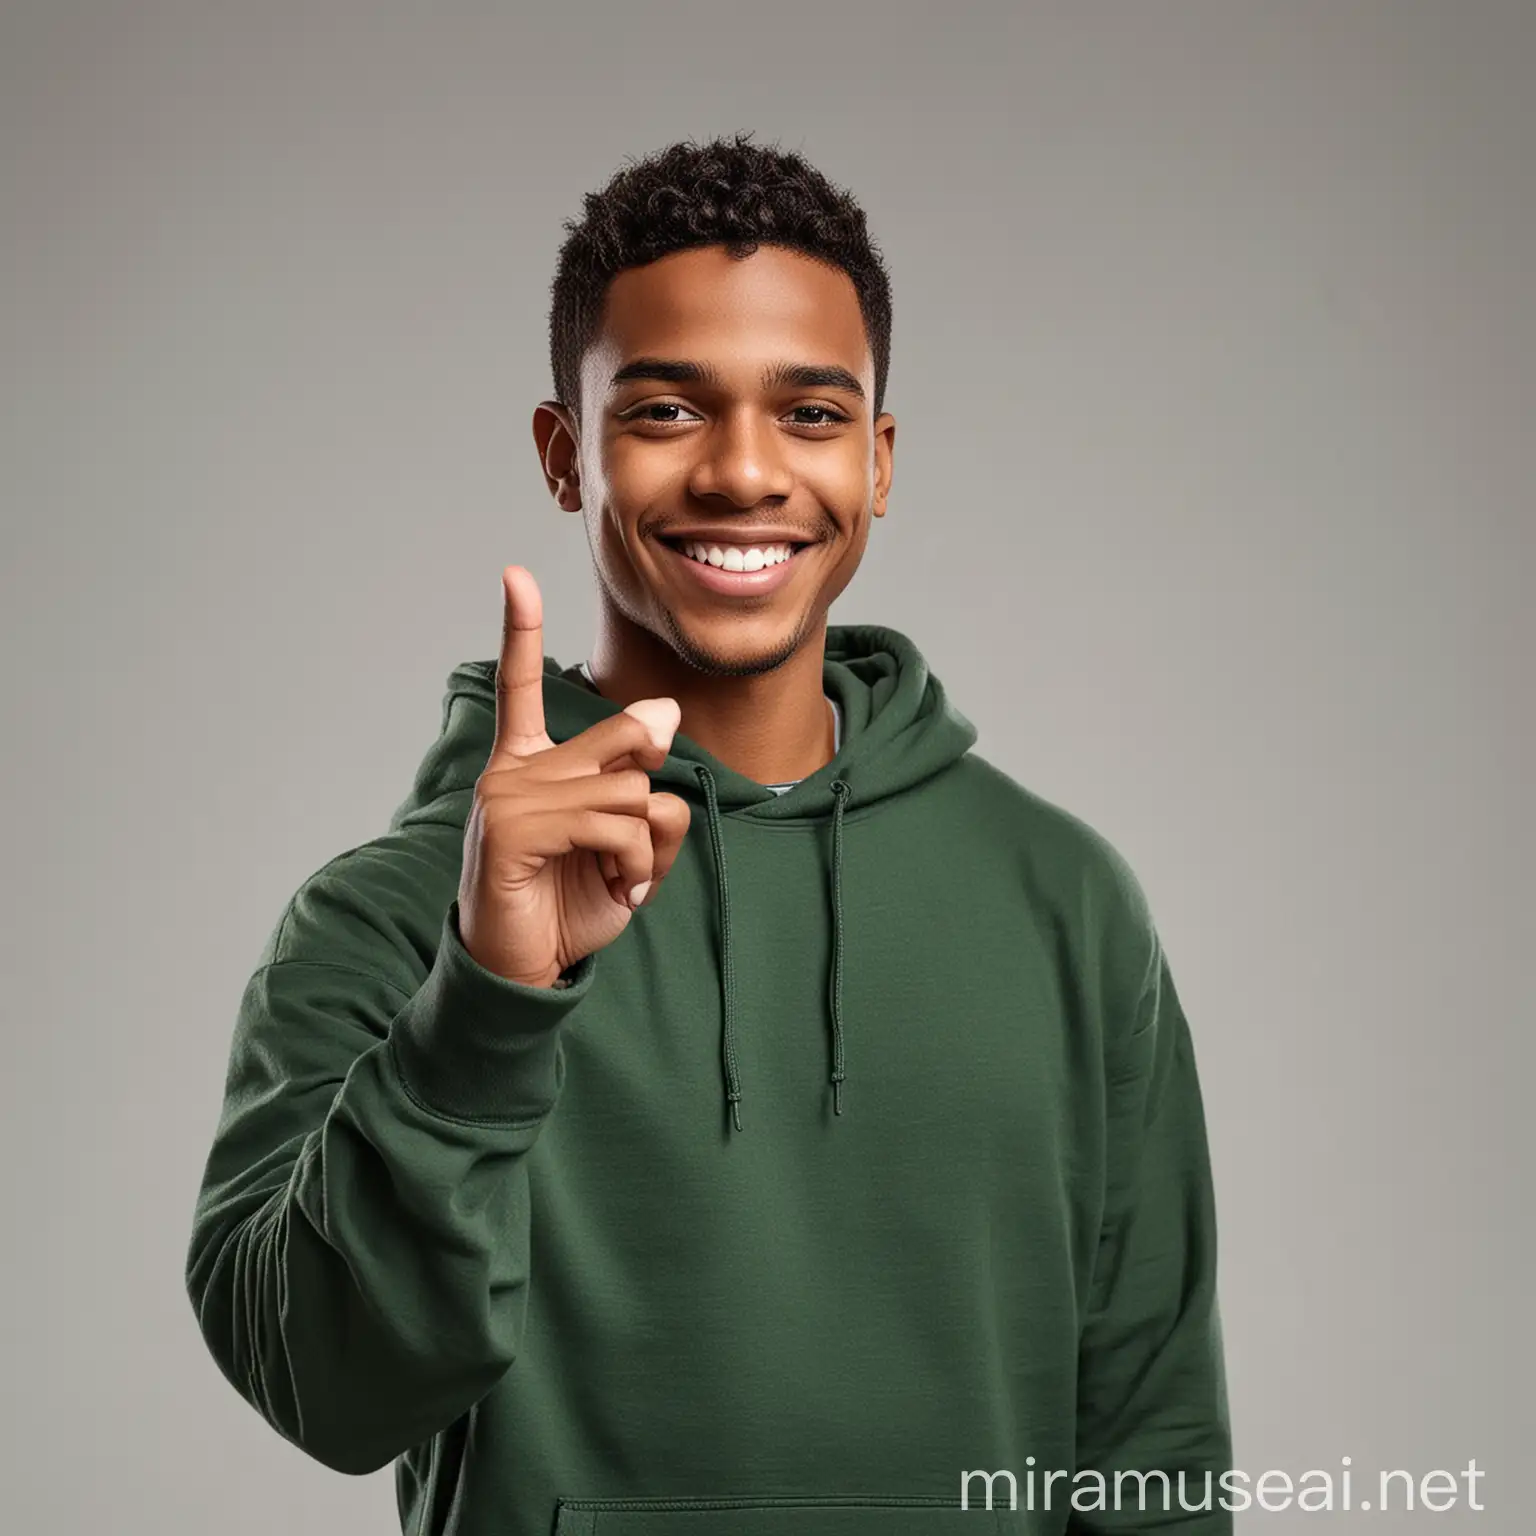 Create a realistic image of a smiling dark skin young man with short hair, wearing a dark green hoodie . The man is doing an that's right sign gesture at camera and is set against a white vibrant background